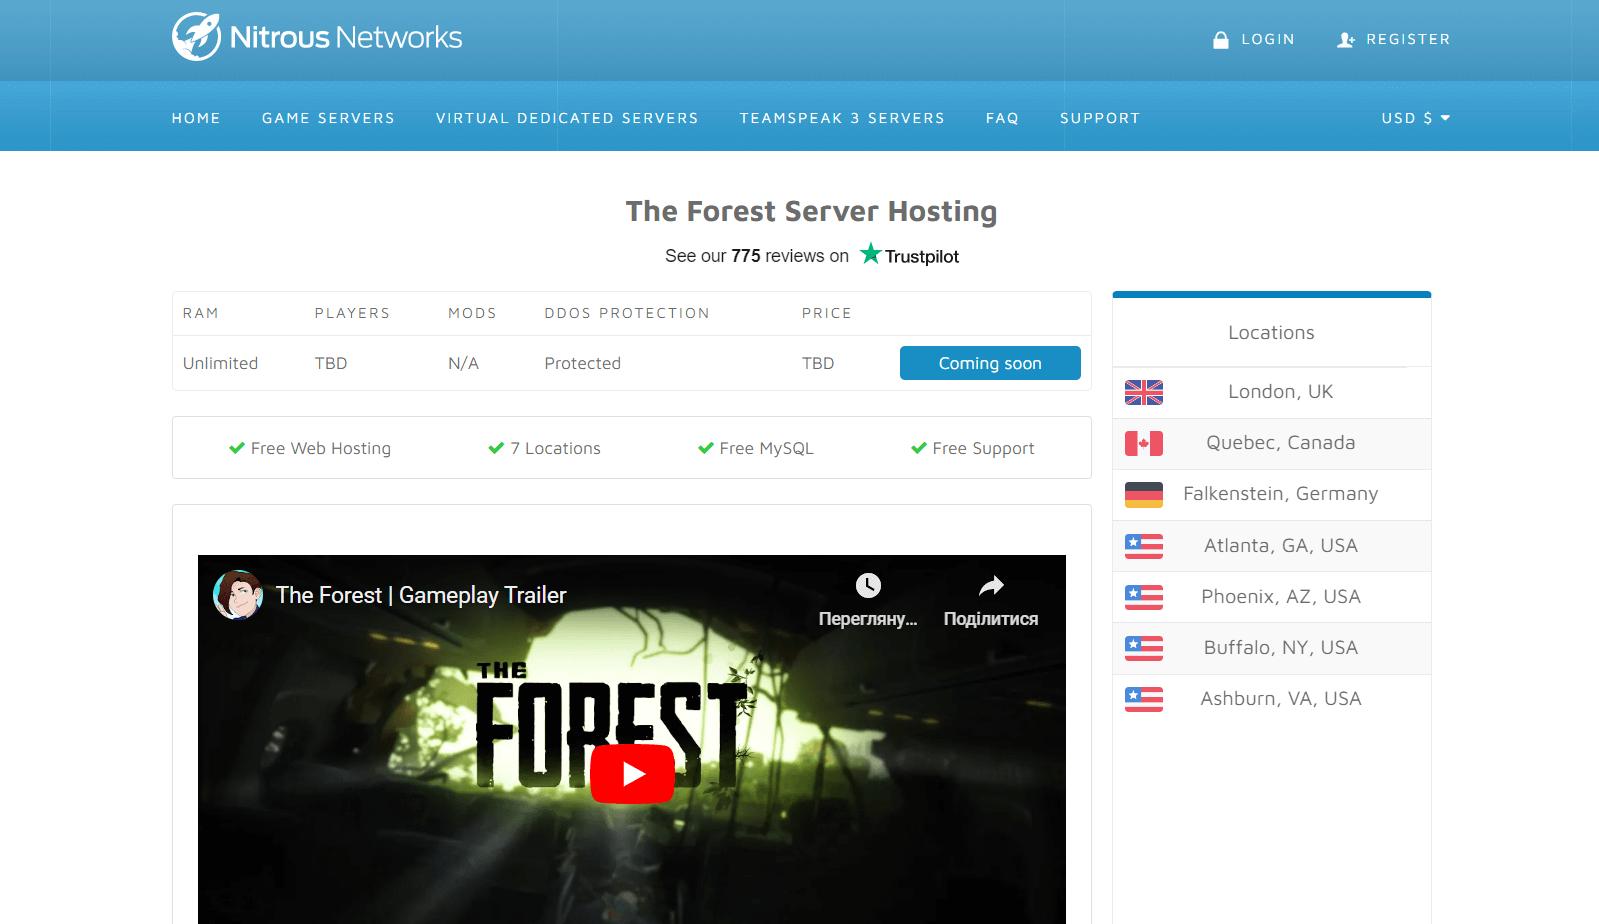 The Forest server setup by Nitrous Networks